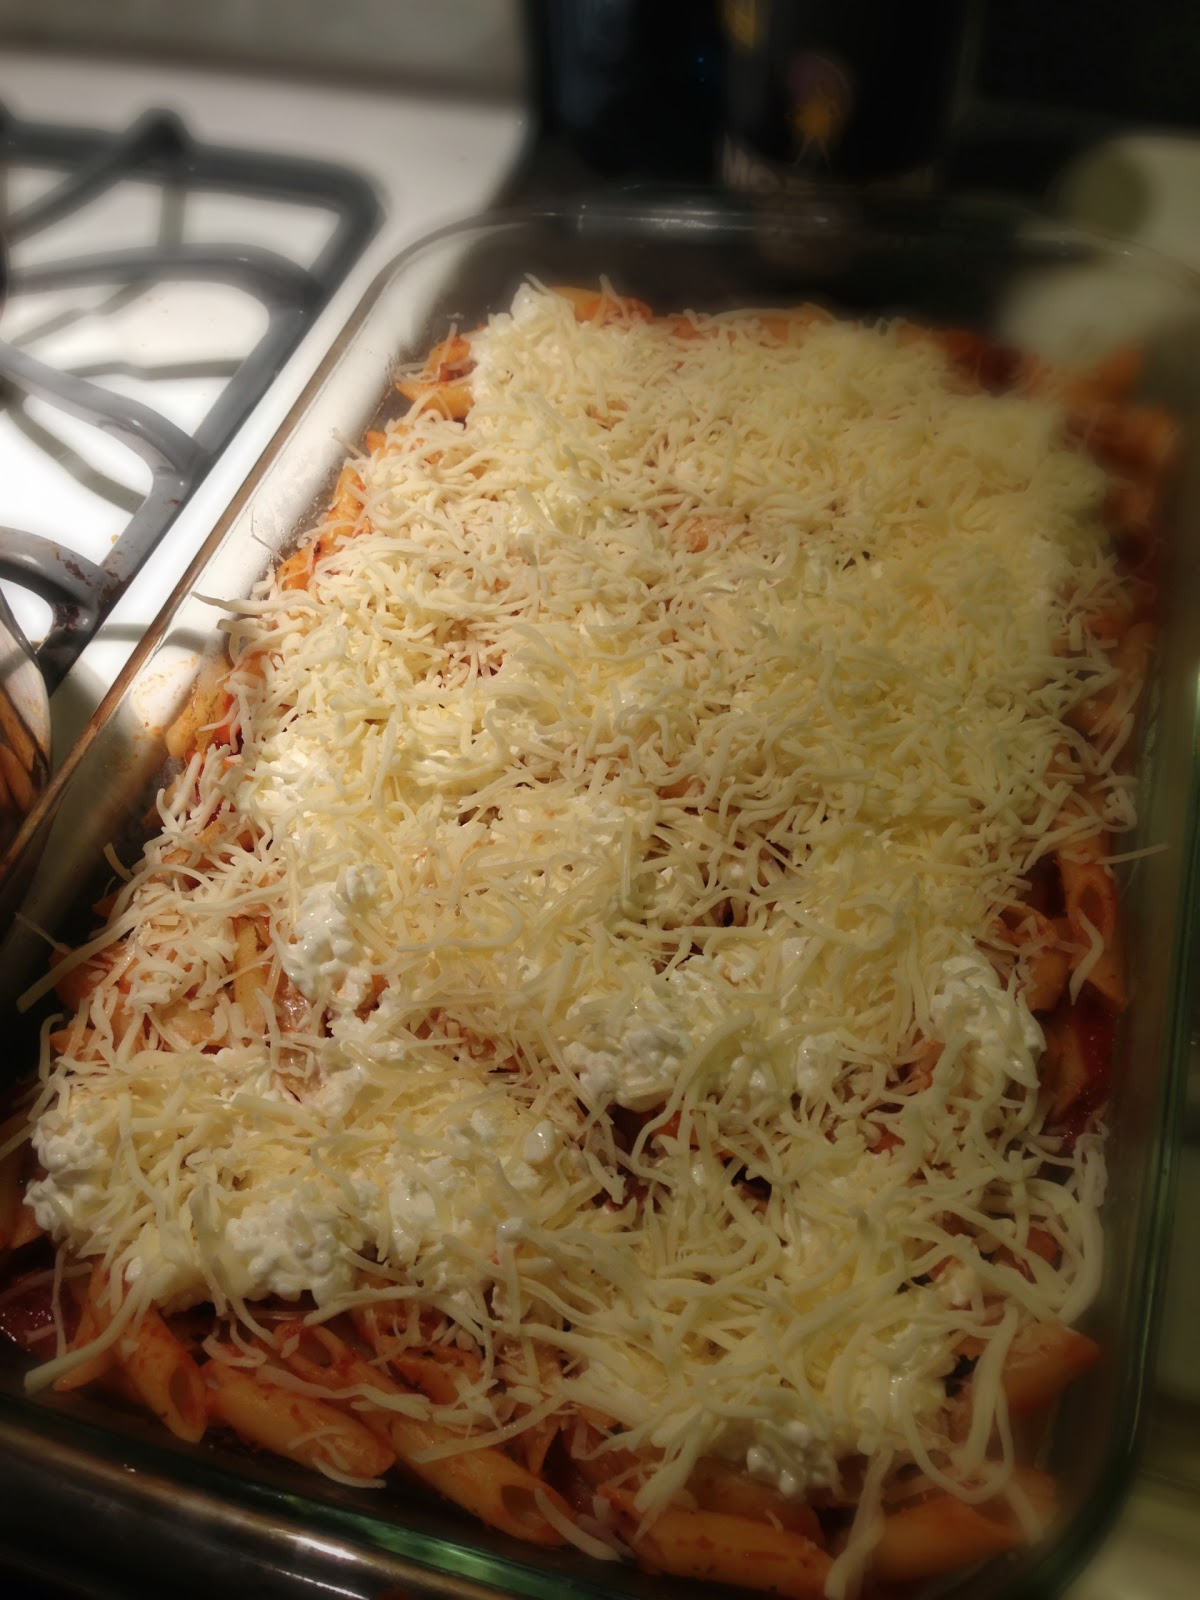 RECIPE: Baked Three Cheese and Sausage Mostaccioli